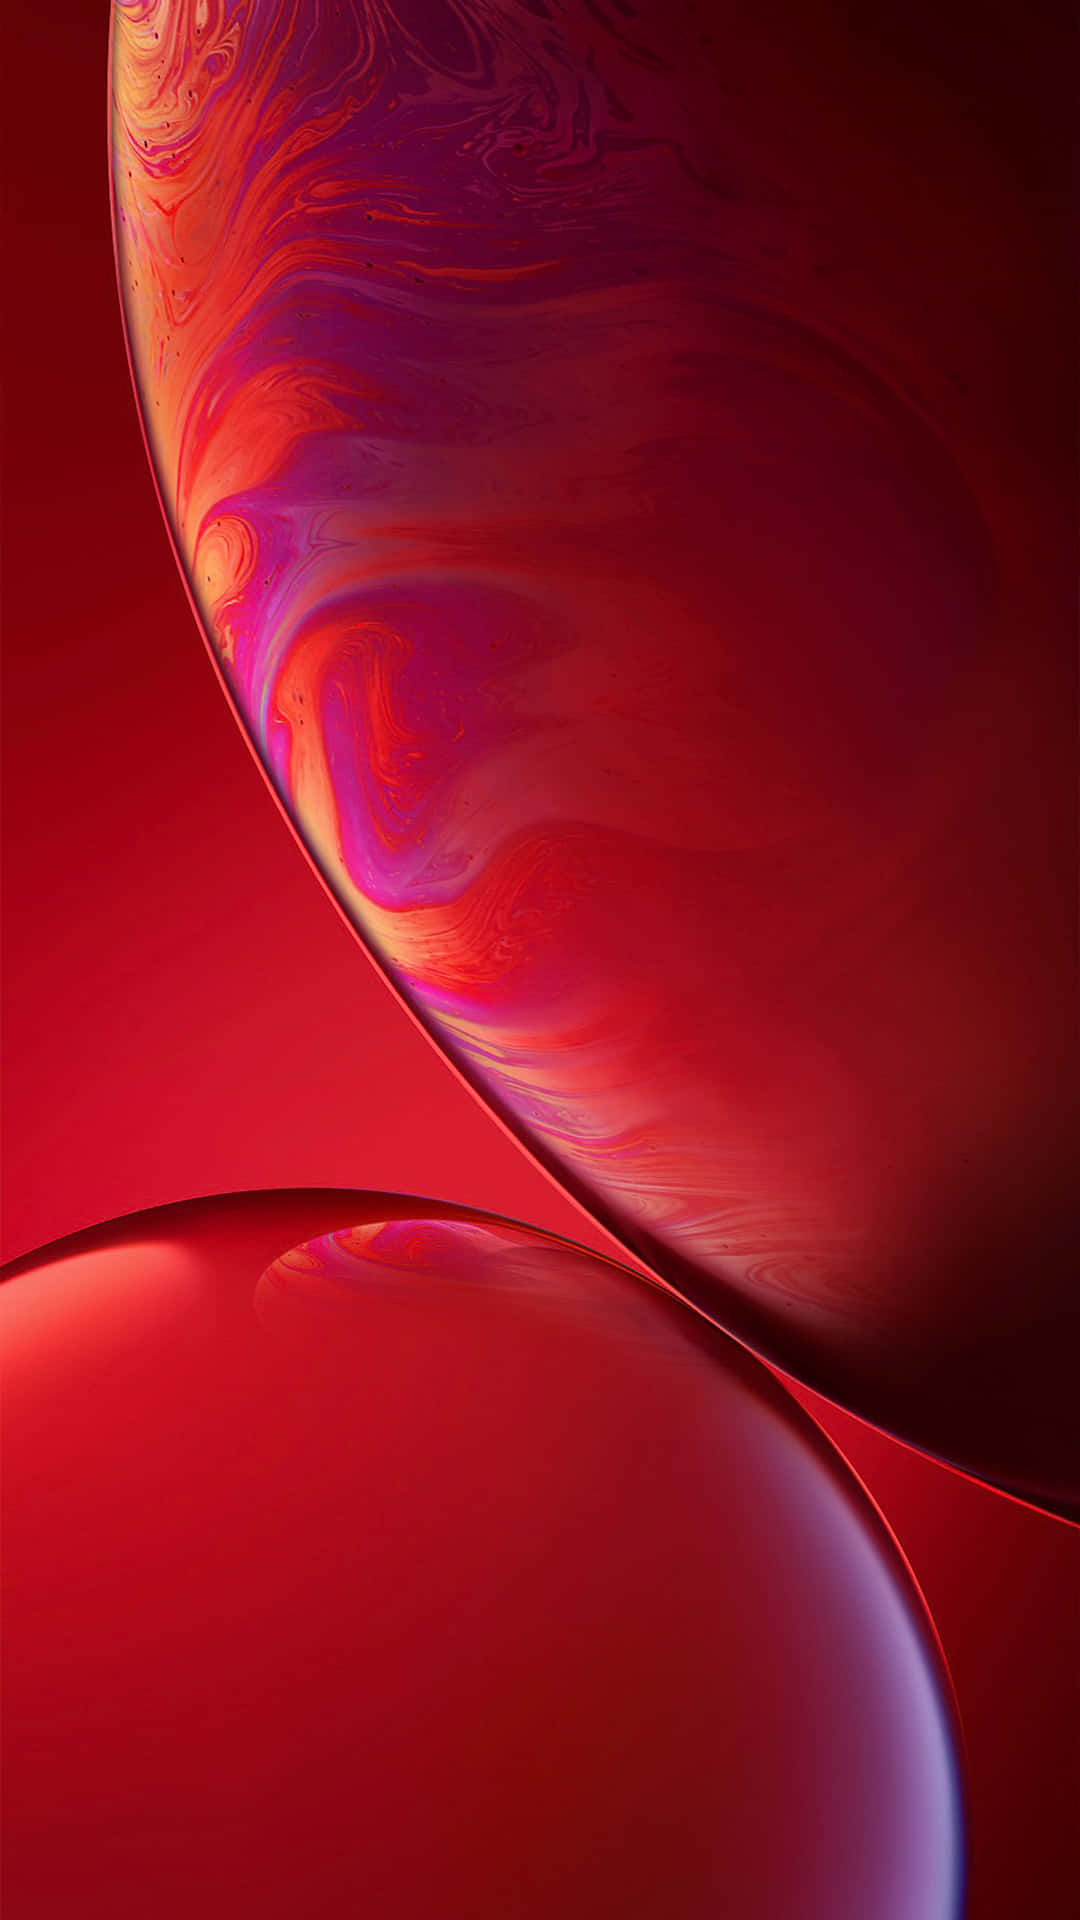 Red And Blue Swirl Design Iphone Wallpaper